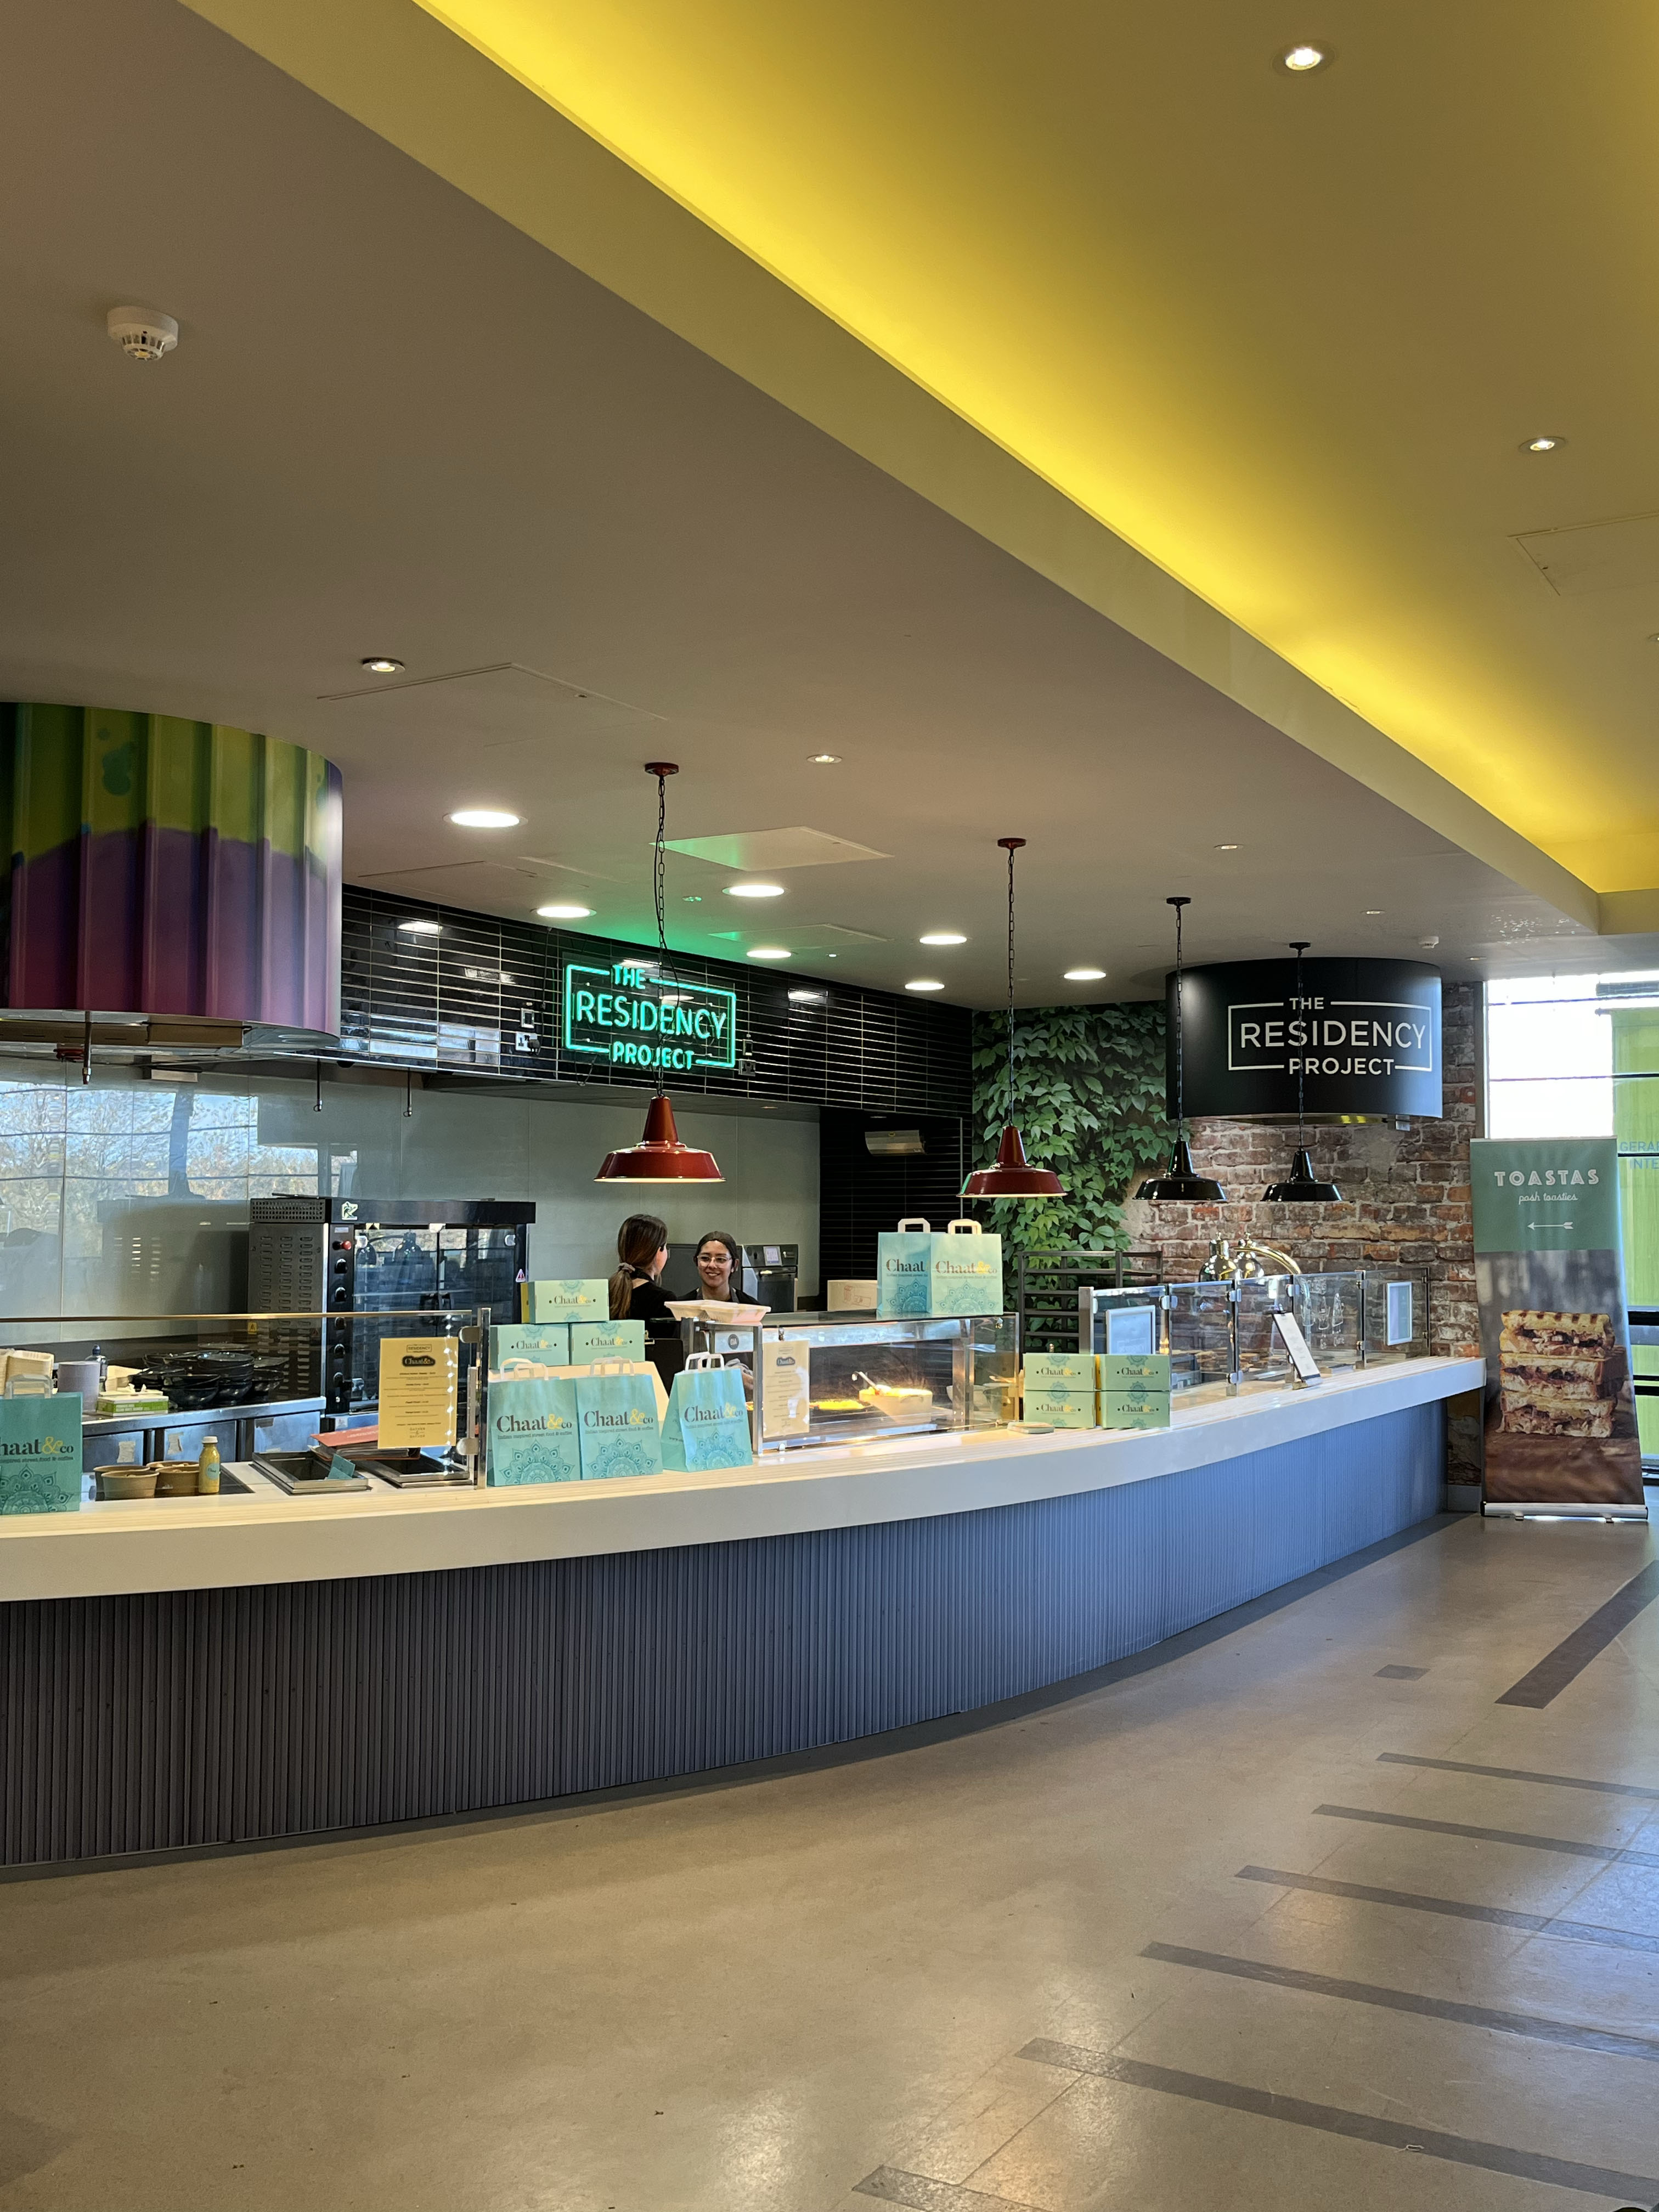 UCD Main Restaurant\n\nA diverse menu for both lunch and dinner, from gourmet sandwiches and salads to warm dinner specials. Dine in or Take away.